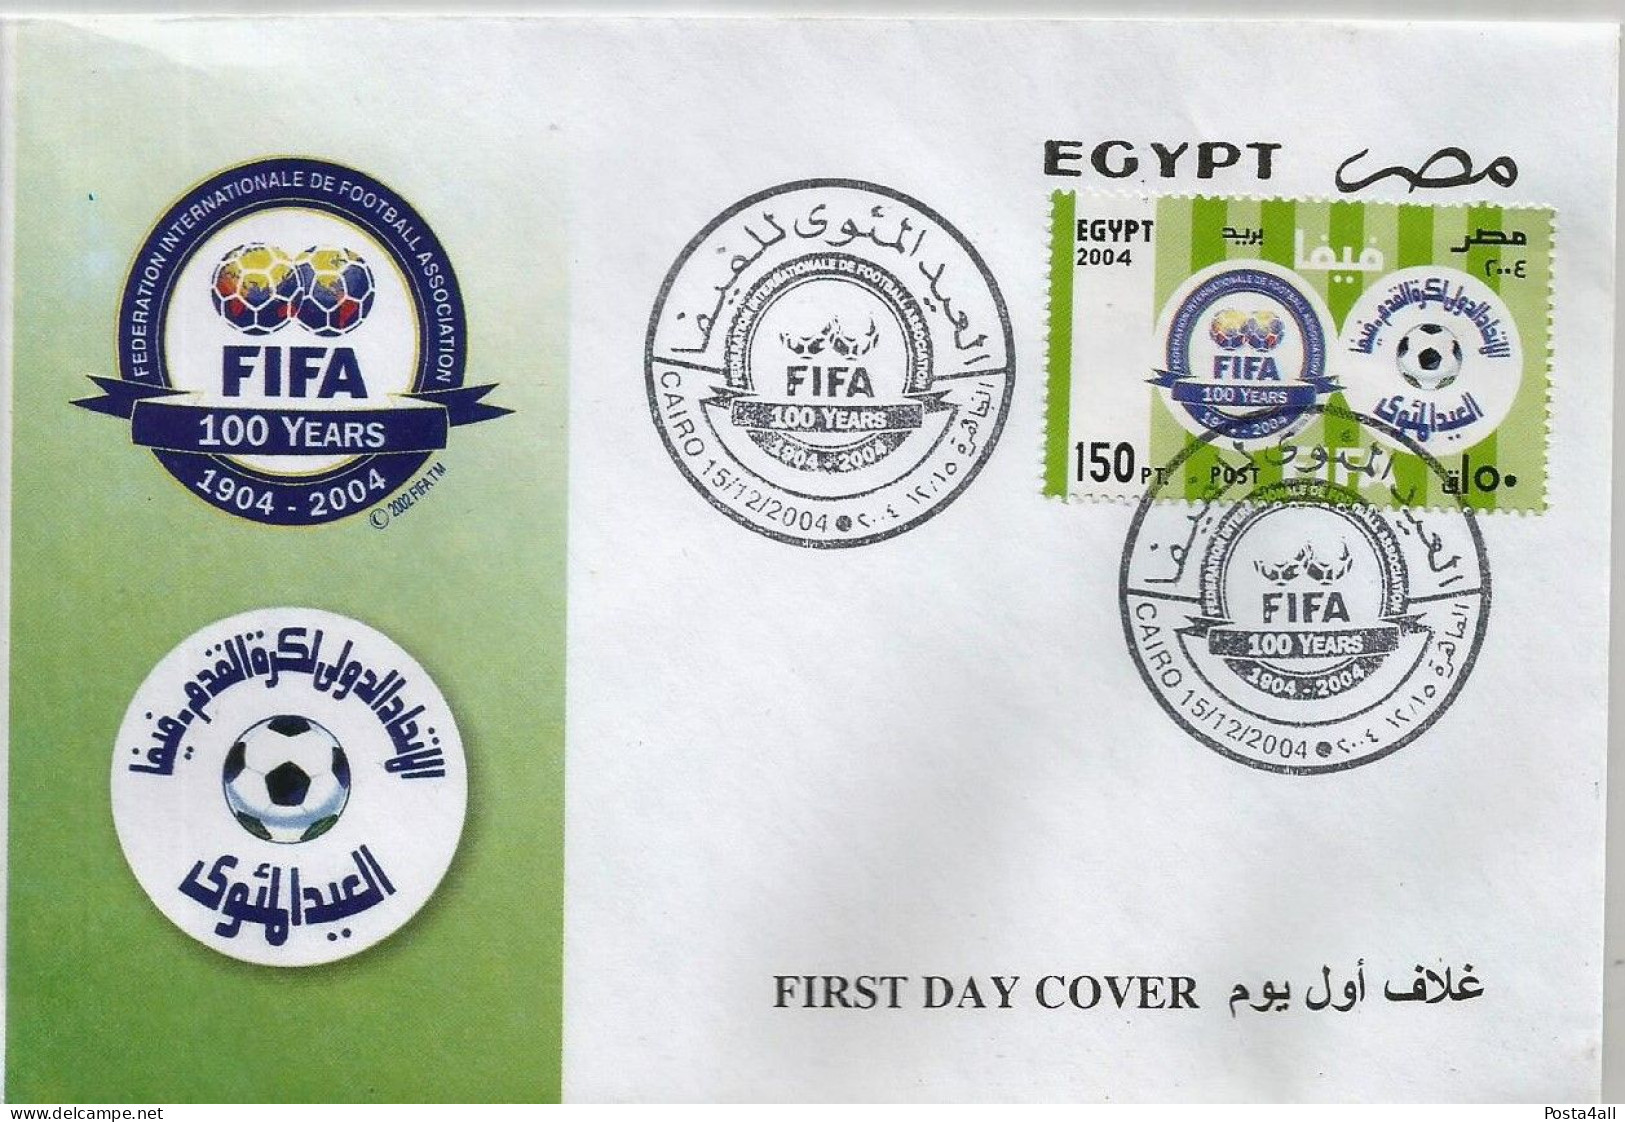 Egypt  - 2004 The 100th Anniversary Of FIFA (Federation Internationale De Football Association)  - Complete Issue - FDC - Briefe U. Dokumente